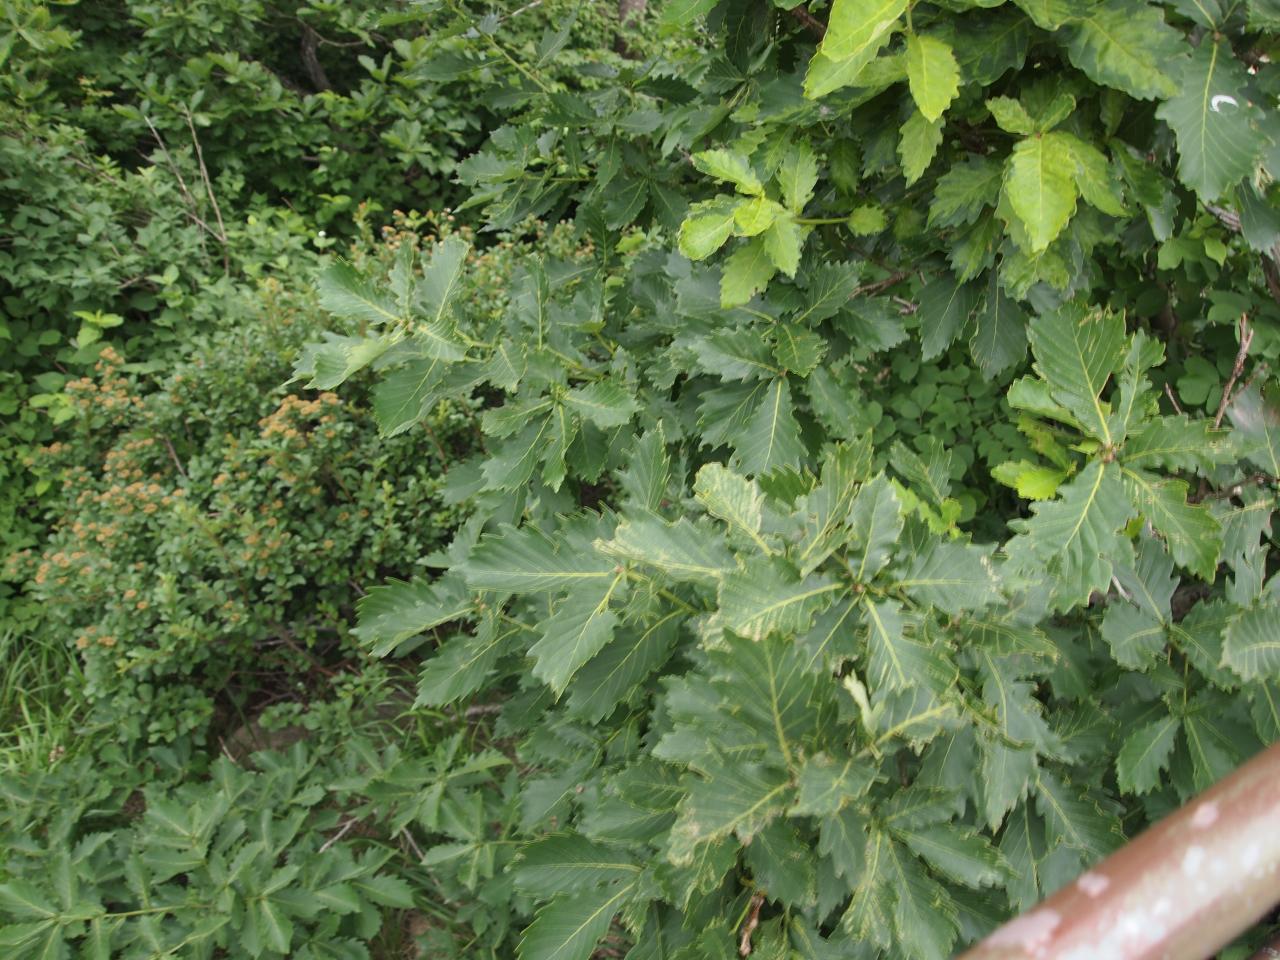 the top view of several bushes, one with large leaves